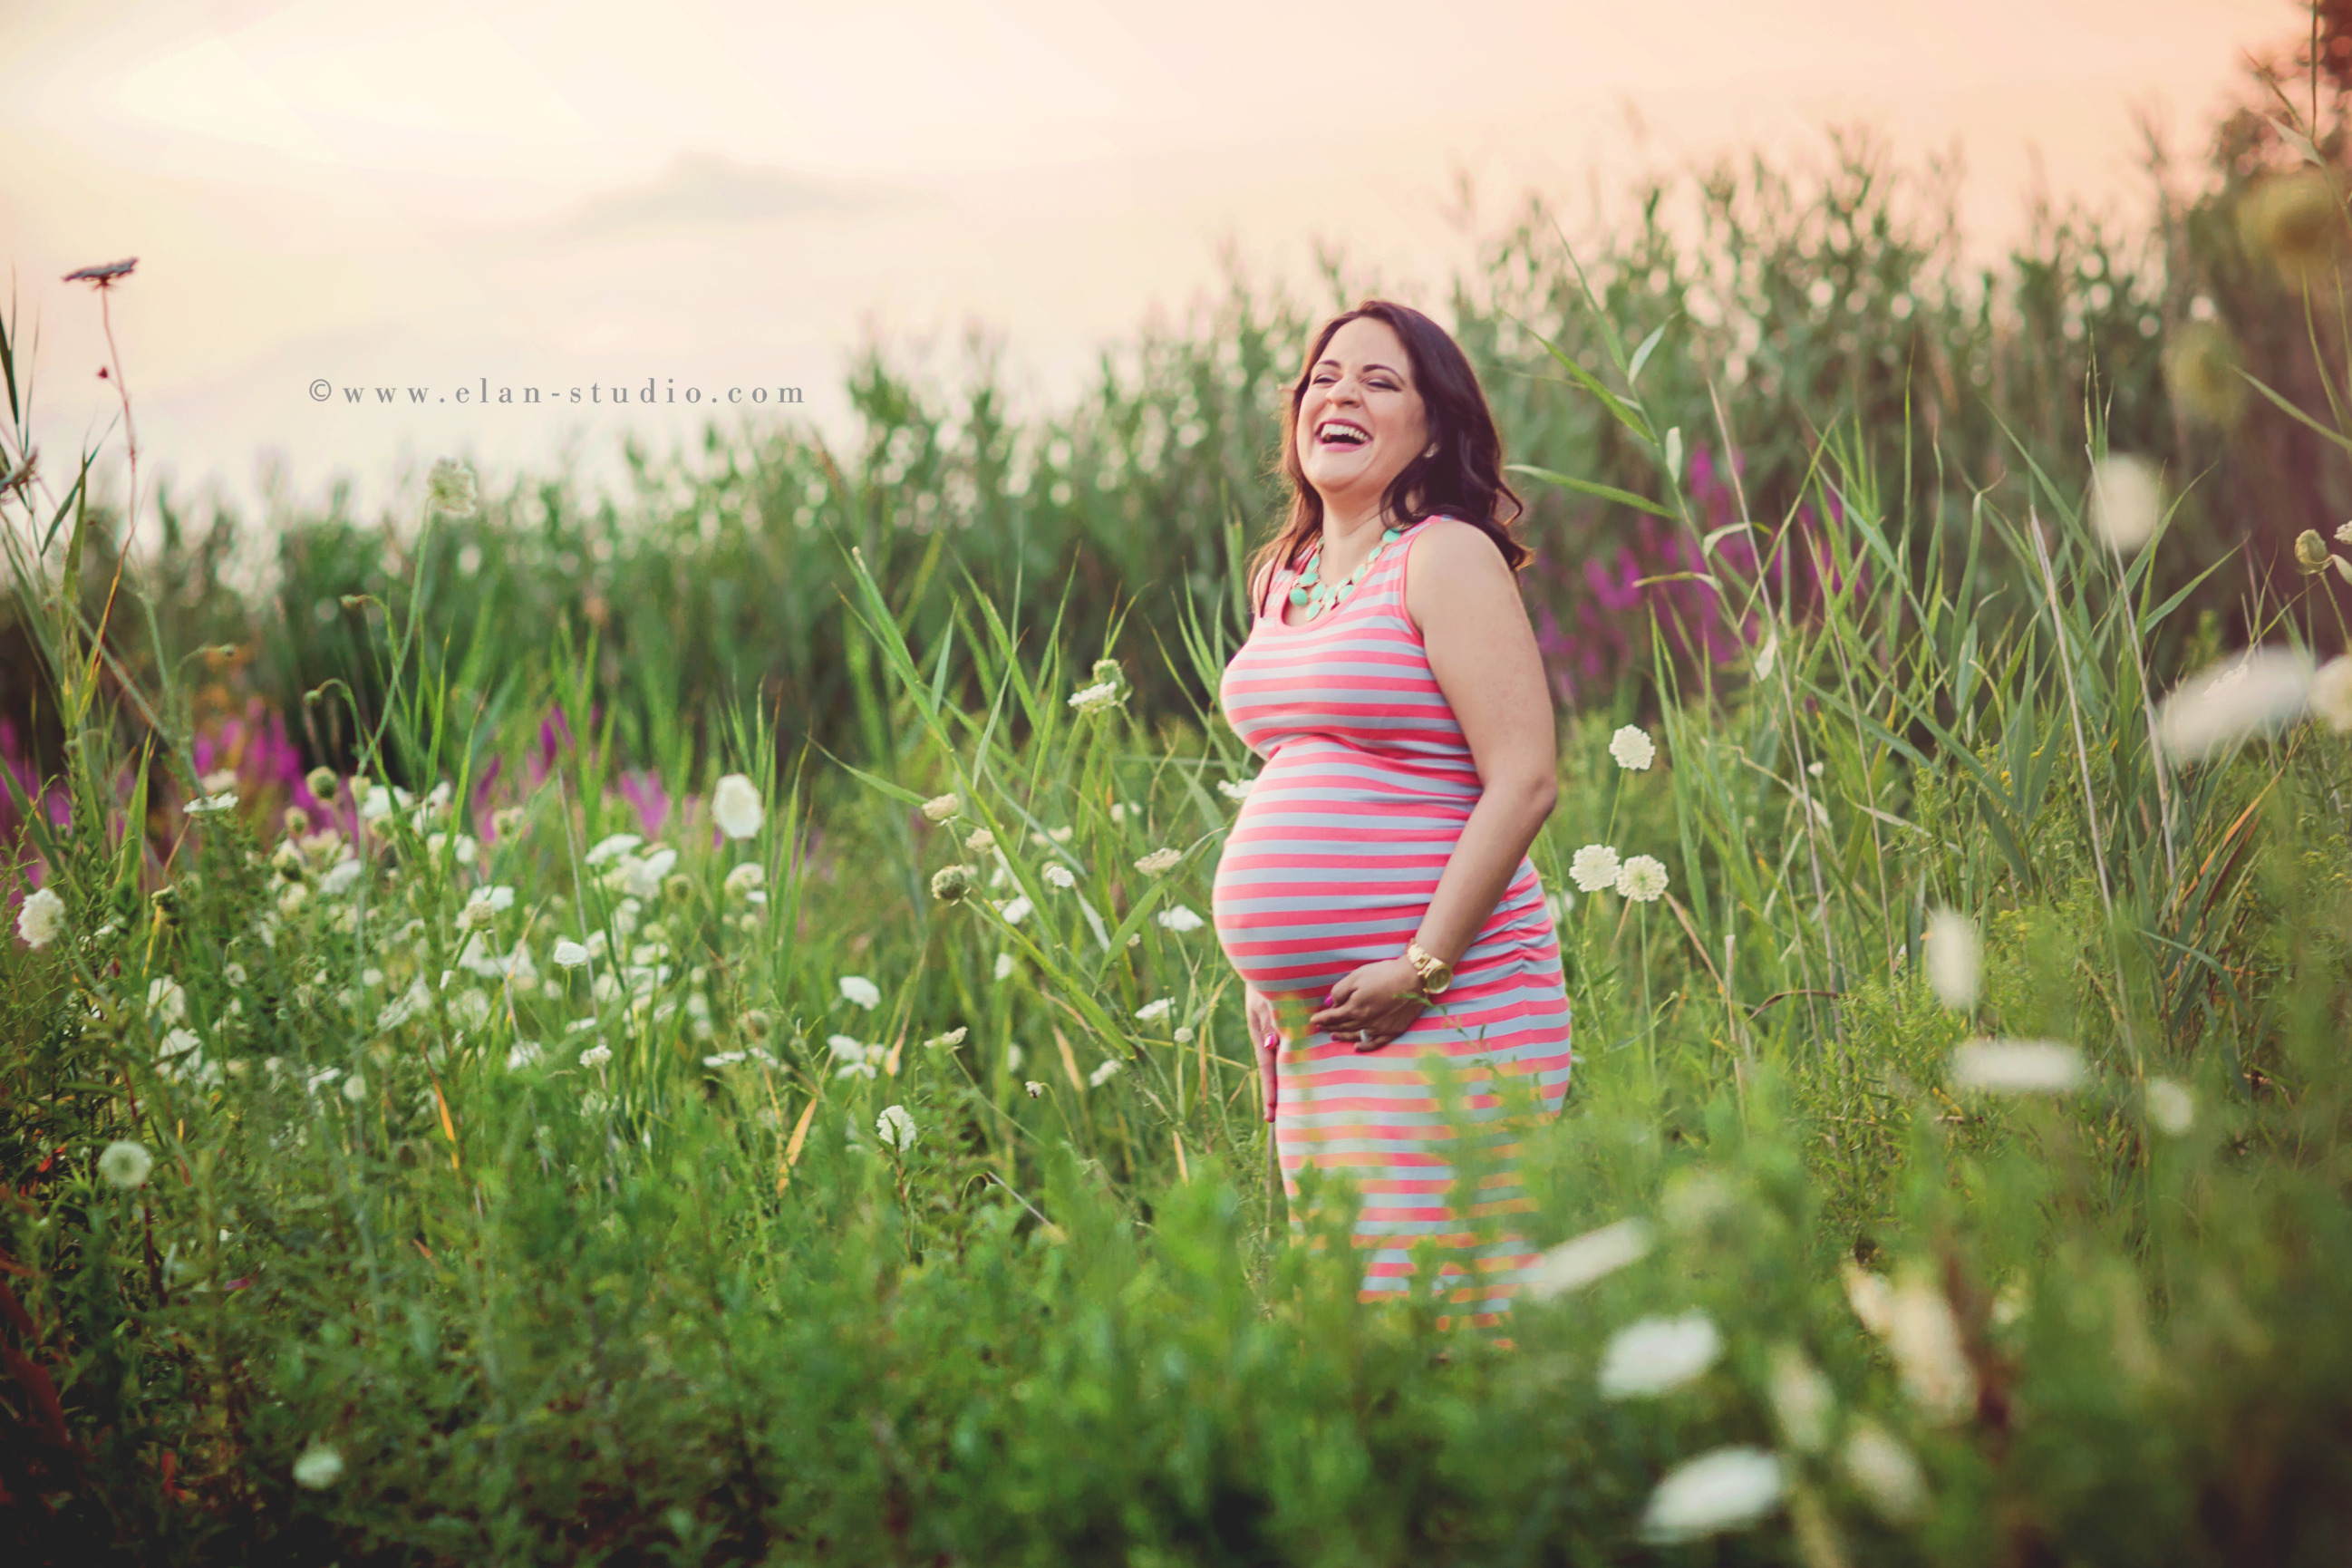 mother to be wearing striped dress and laughing in a field of wildflowers